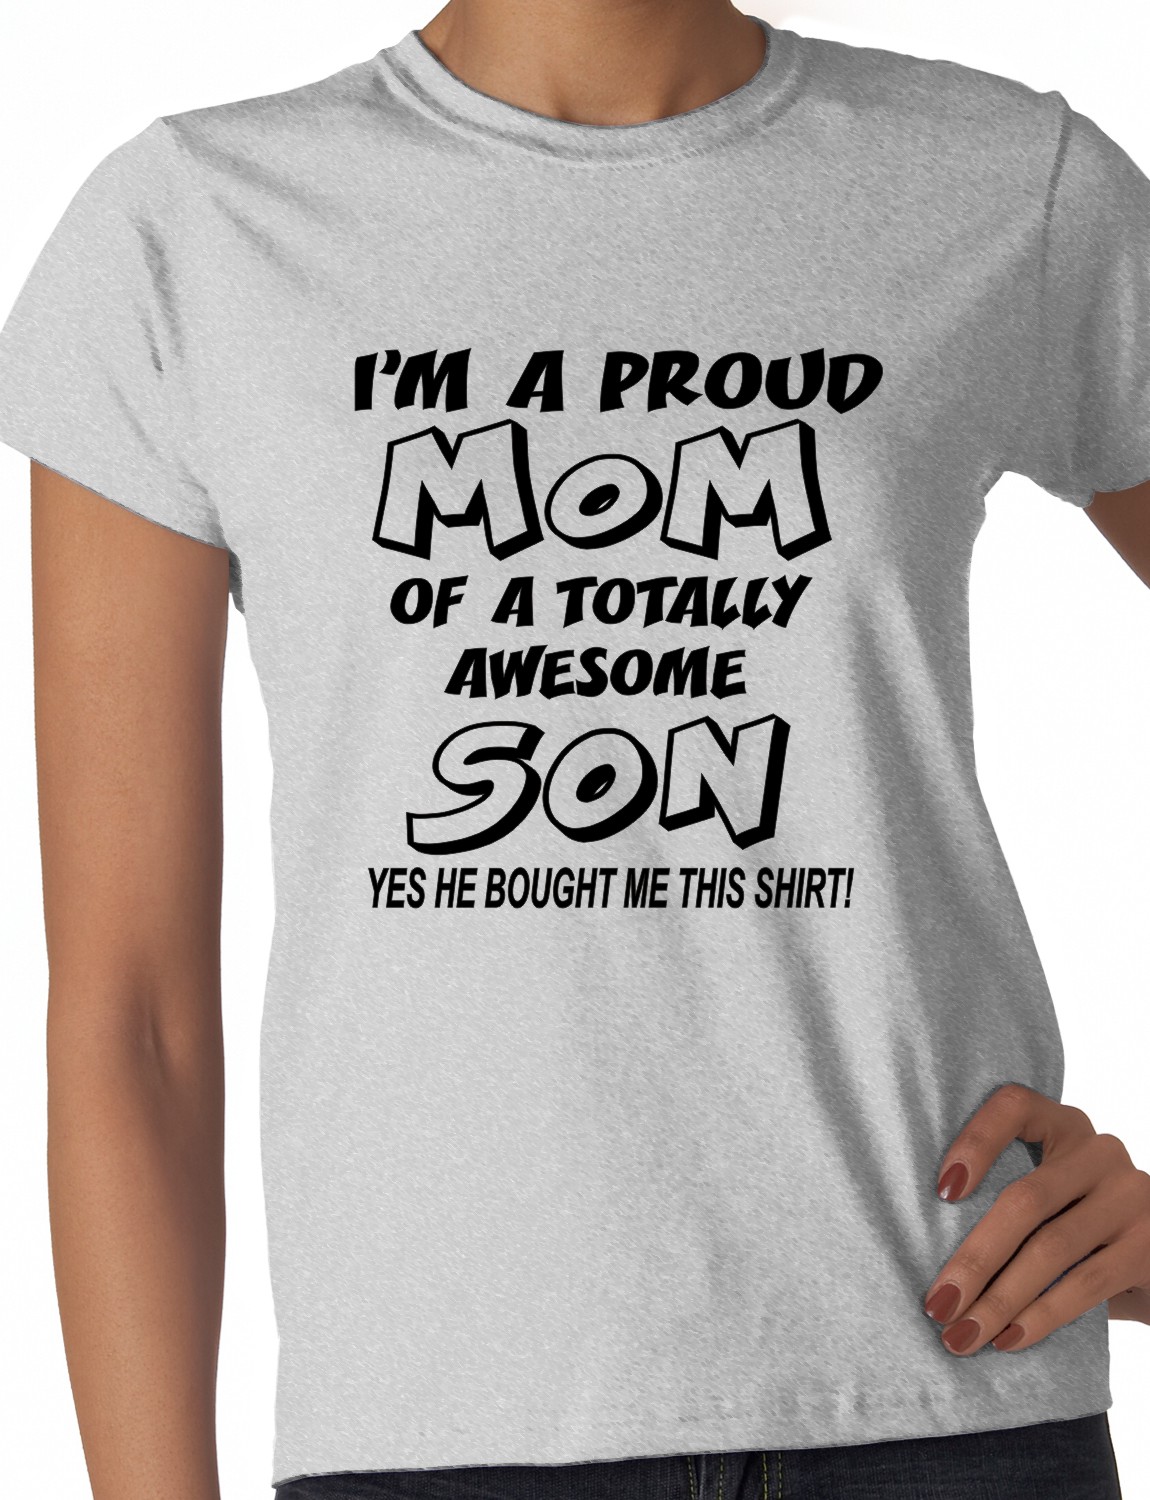 Funny T Shirts For Moms Agbu Hye Geen - roblox t shirt kid t shirt shirts mothertshirt mother